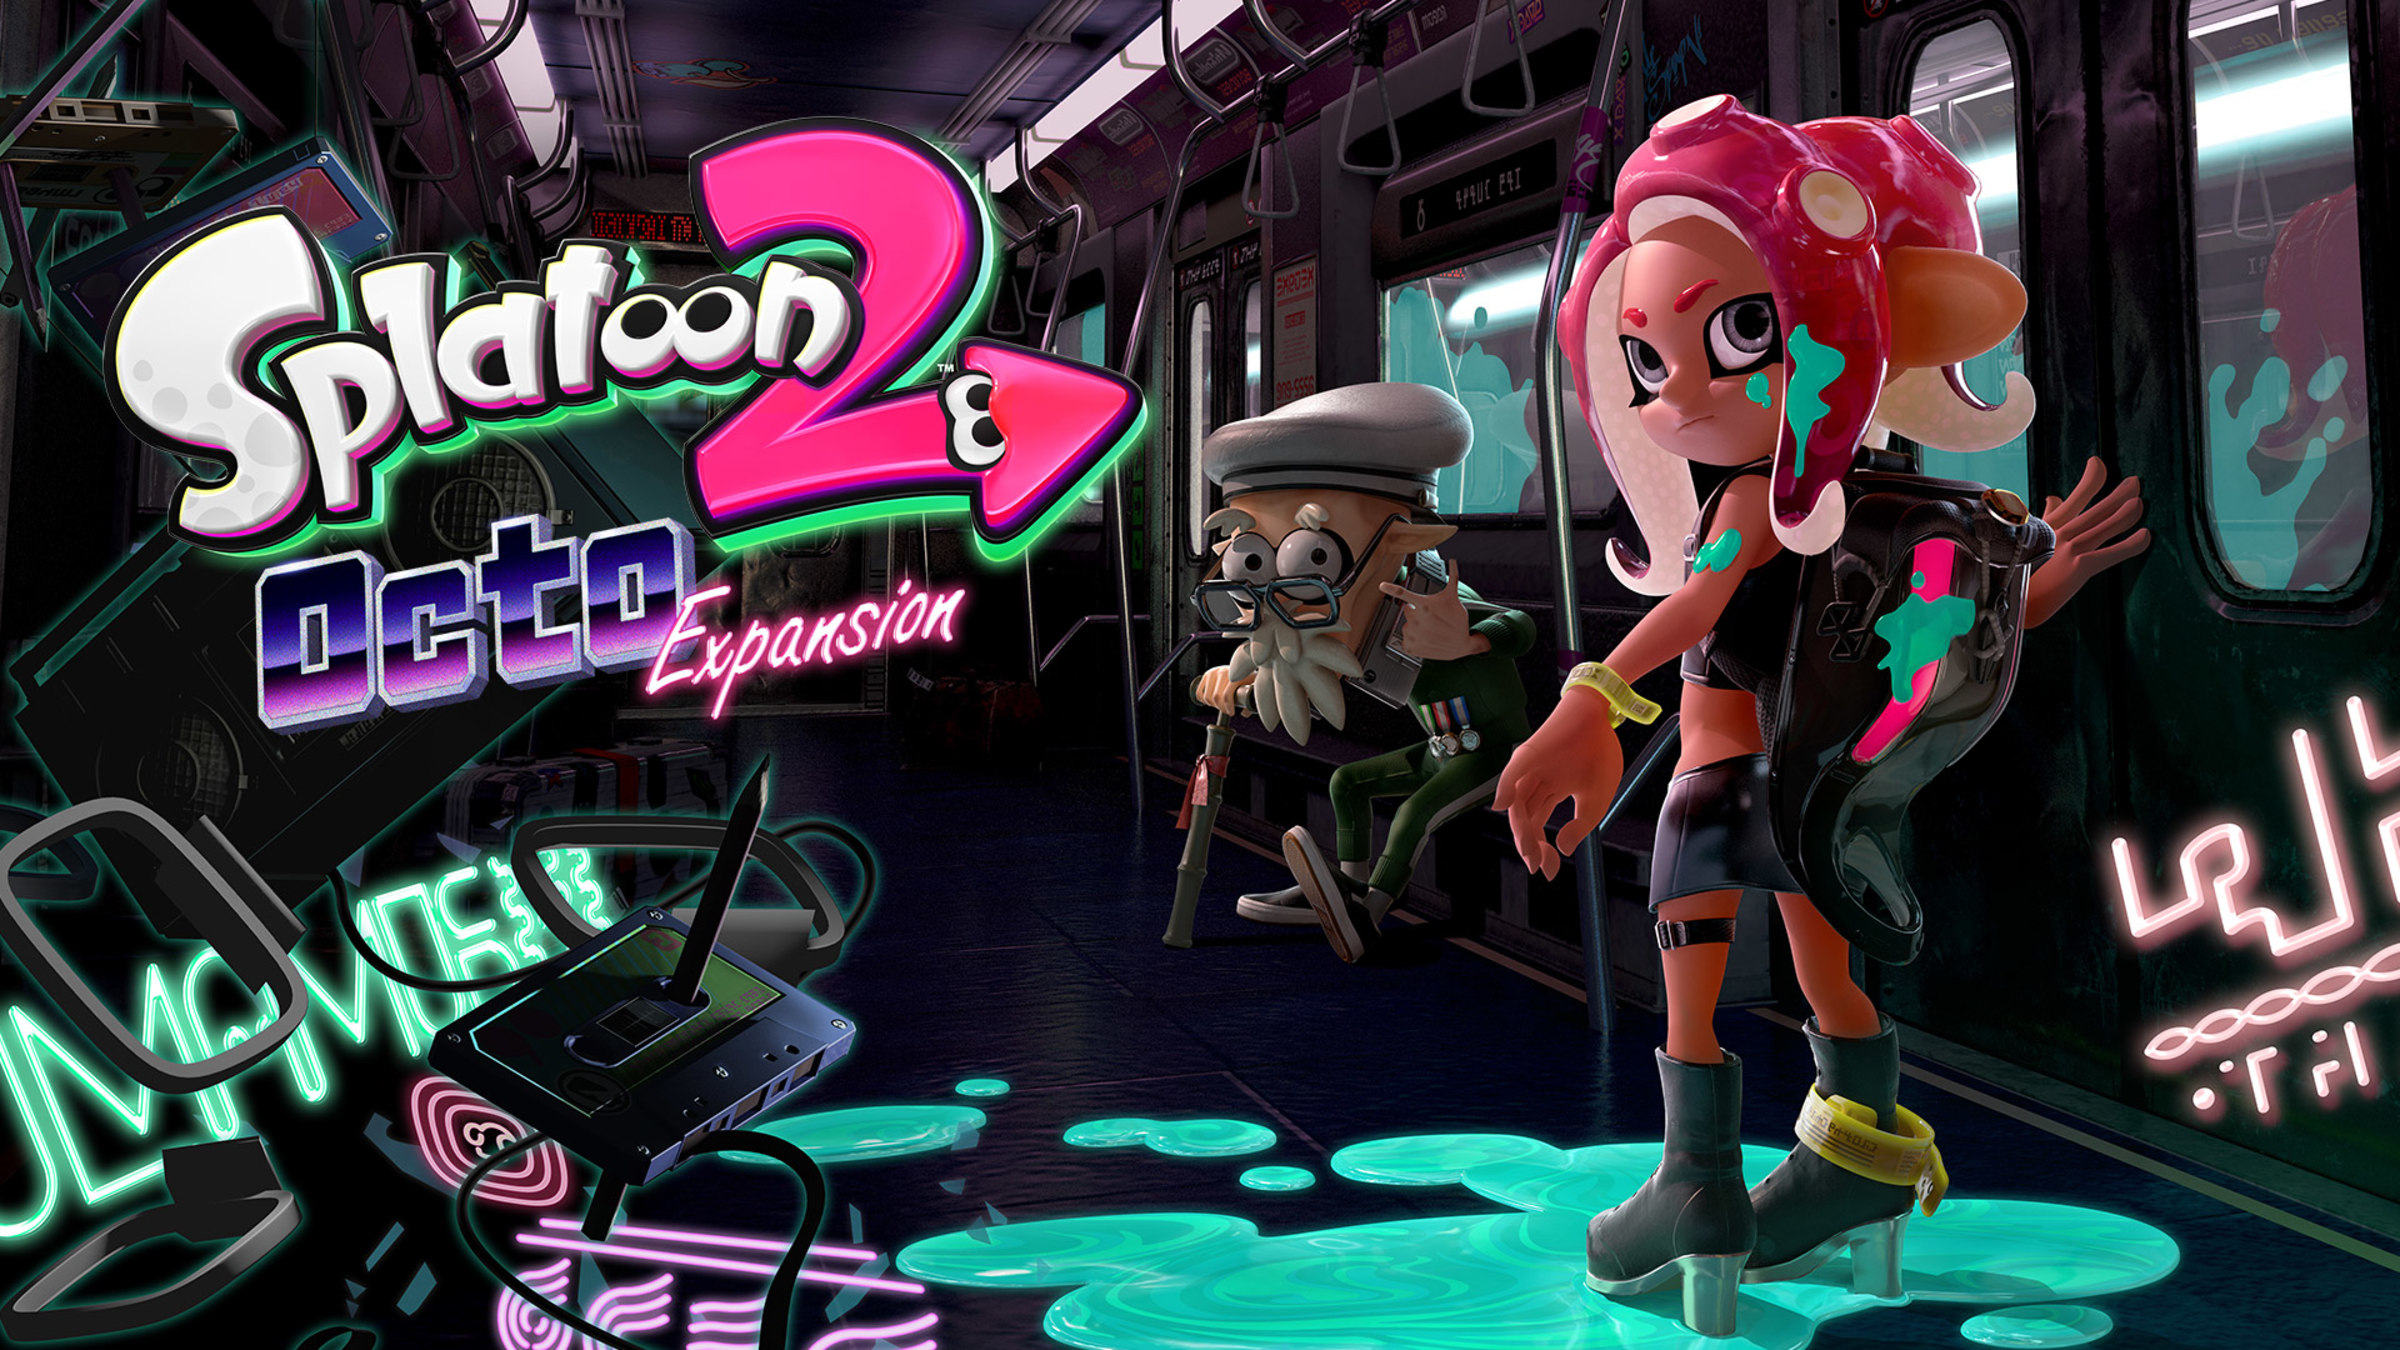 Nintendo Switch Site - Nintendo 2: Octo for Splatoon™ Expansion Official